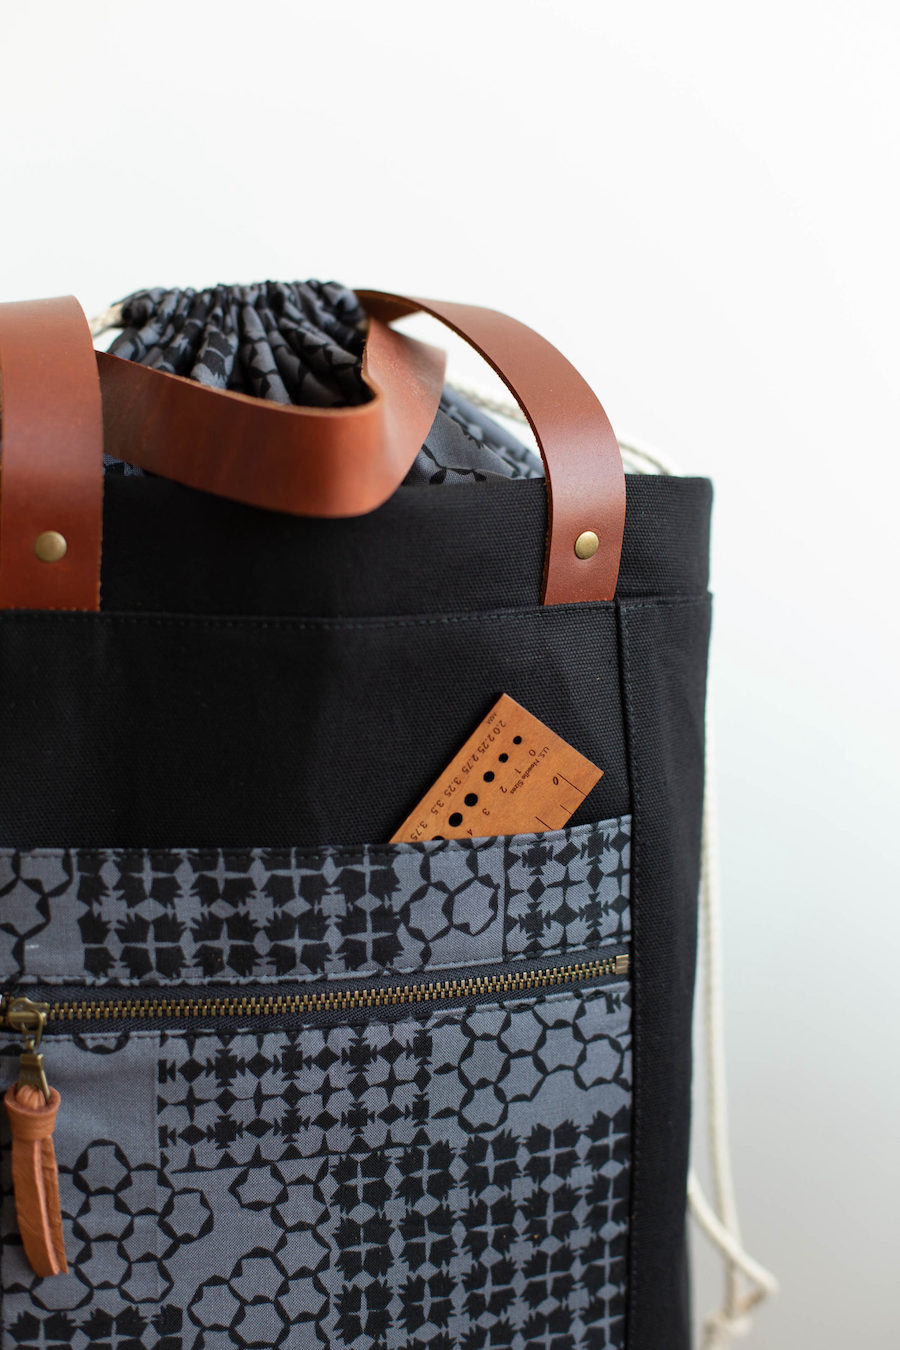 Firefly Tote Pattern by Noodlehead